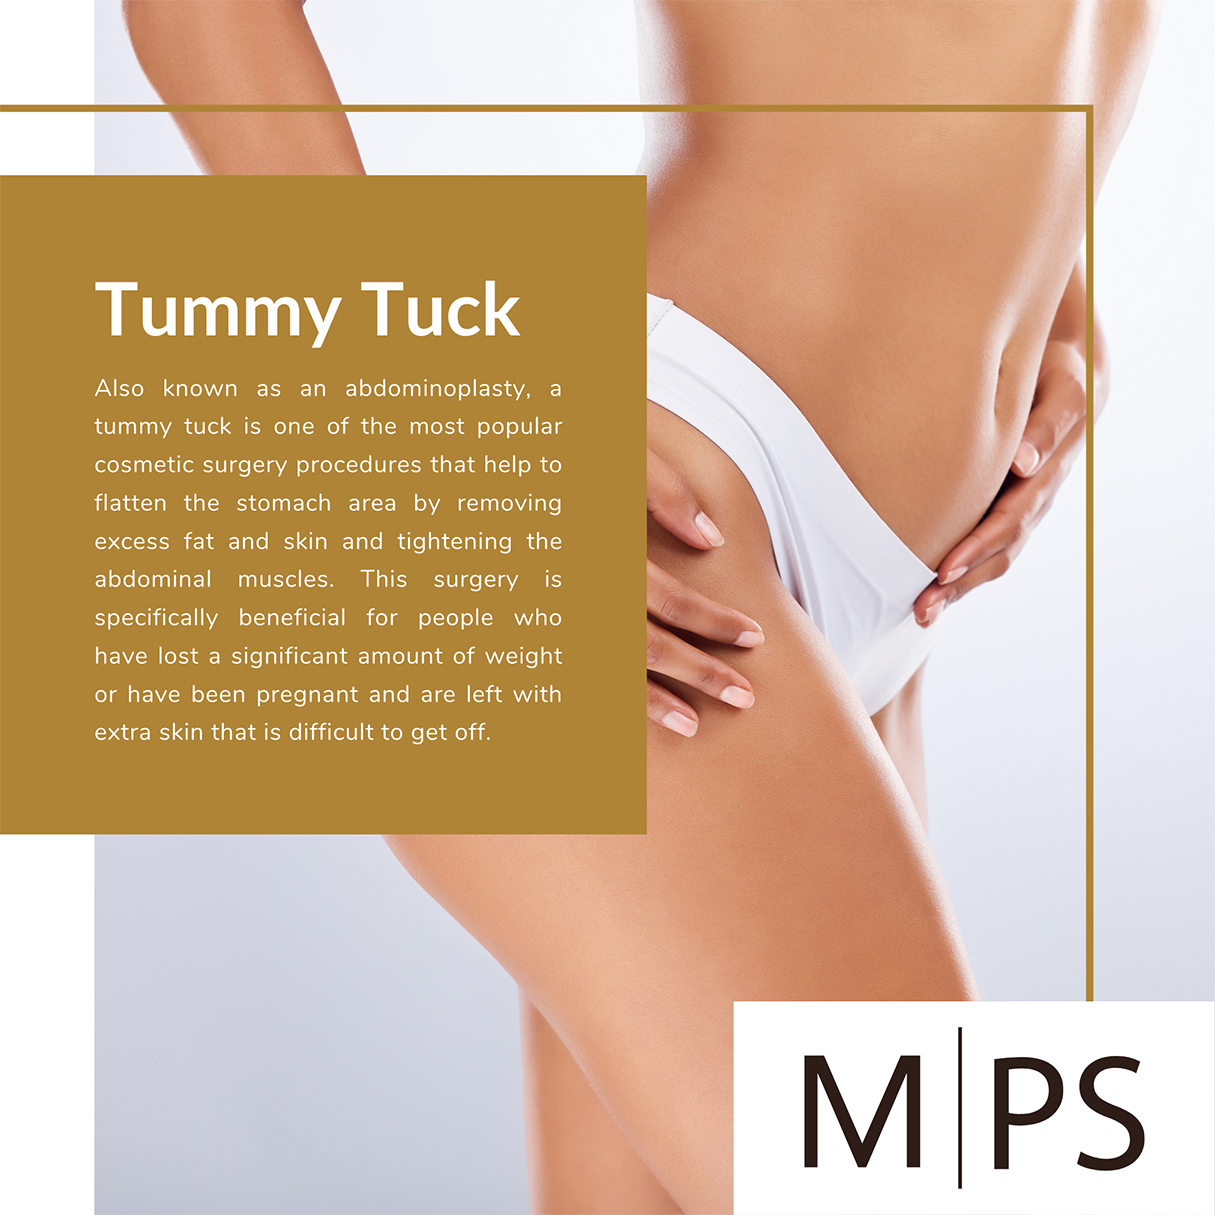 Nordesthetics clinic - The timeline for tummy tuck recovery varies based on  individual, so it is important to ensure you've set realistic expectations.  Many will still experience swelling in the months following